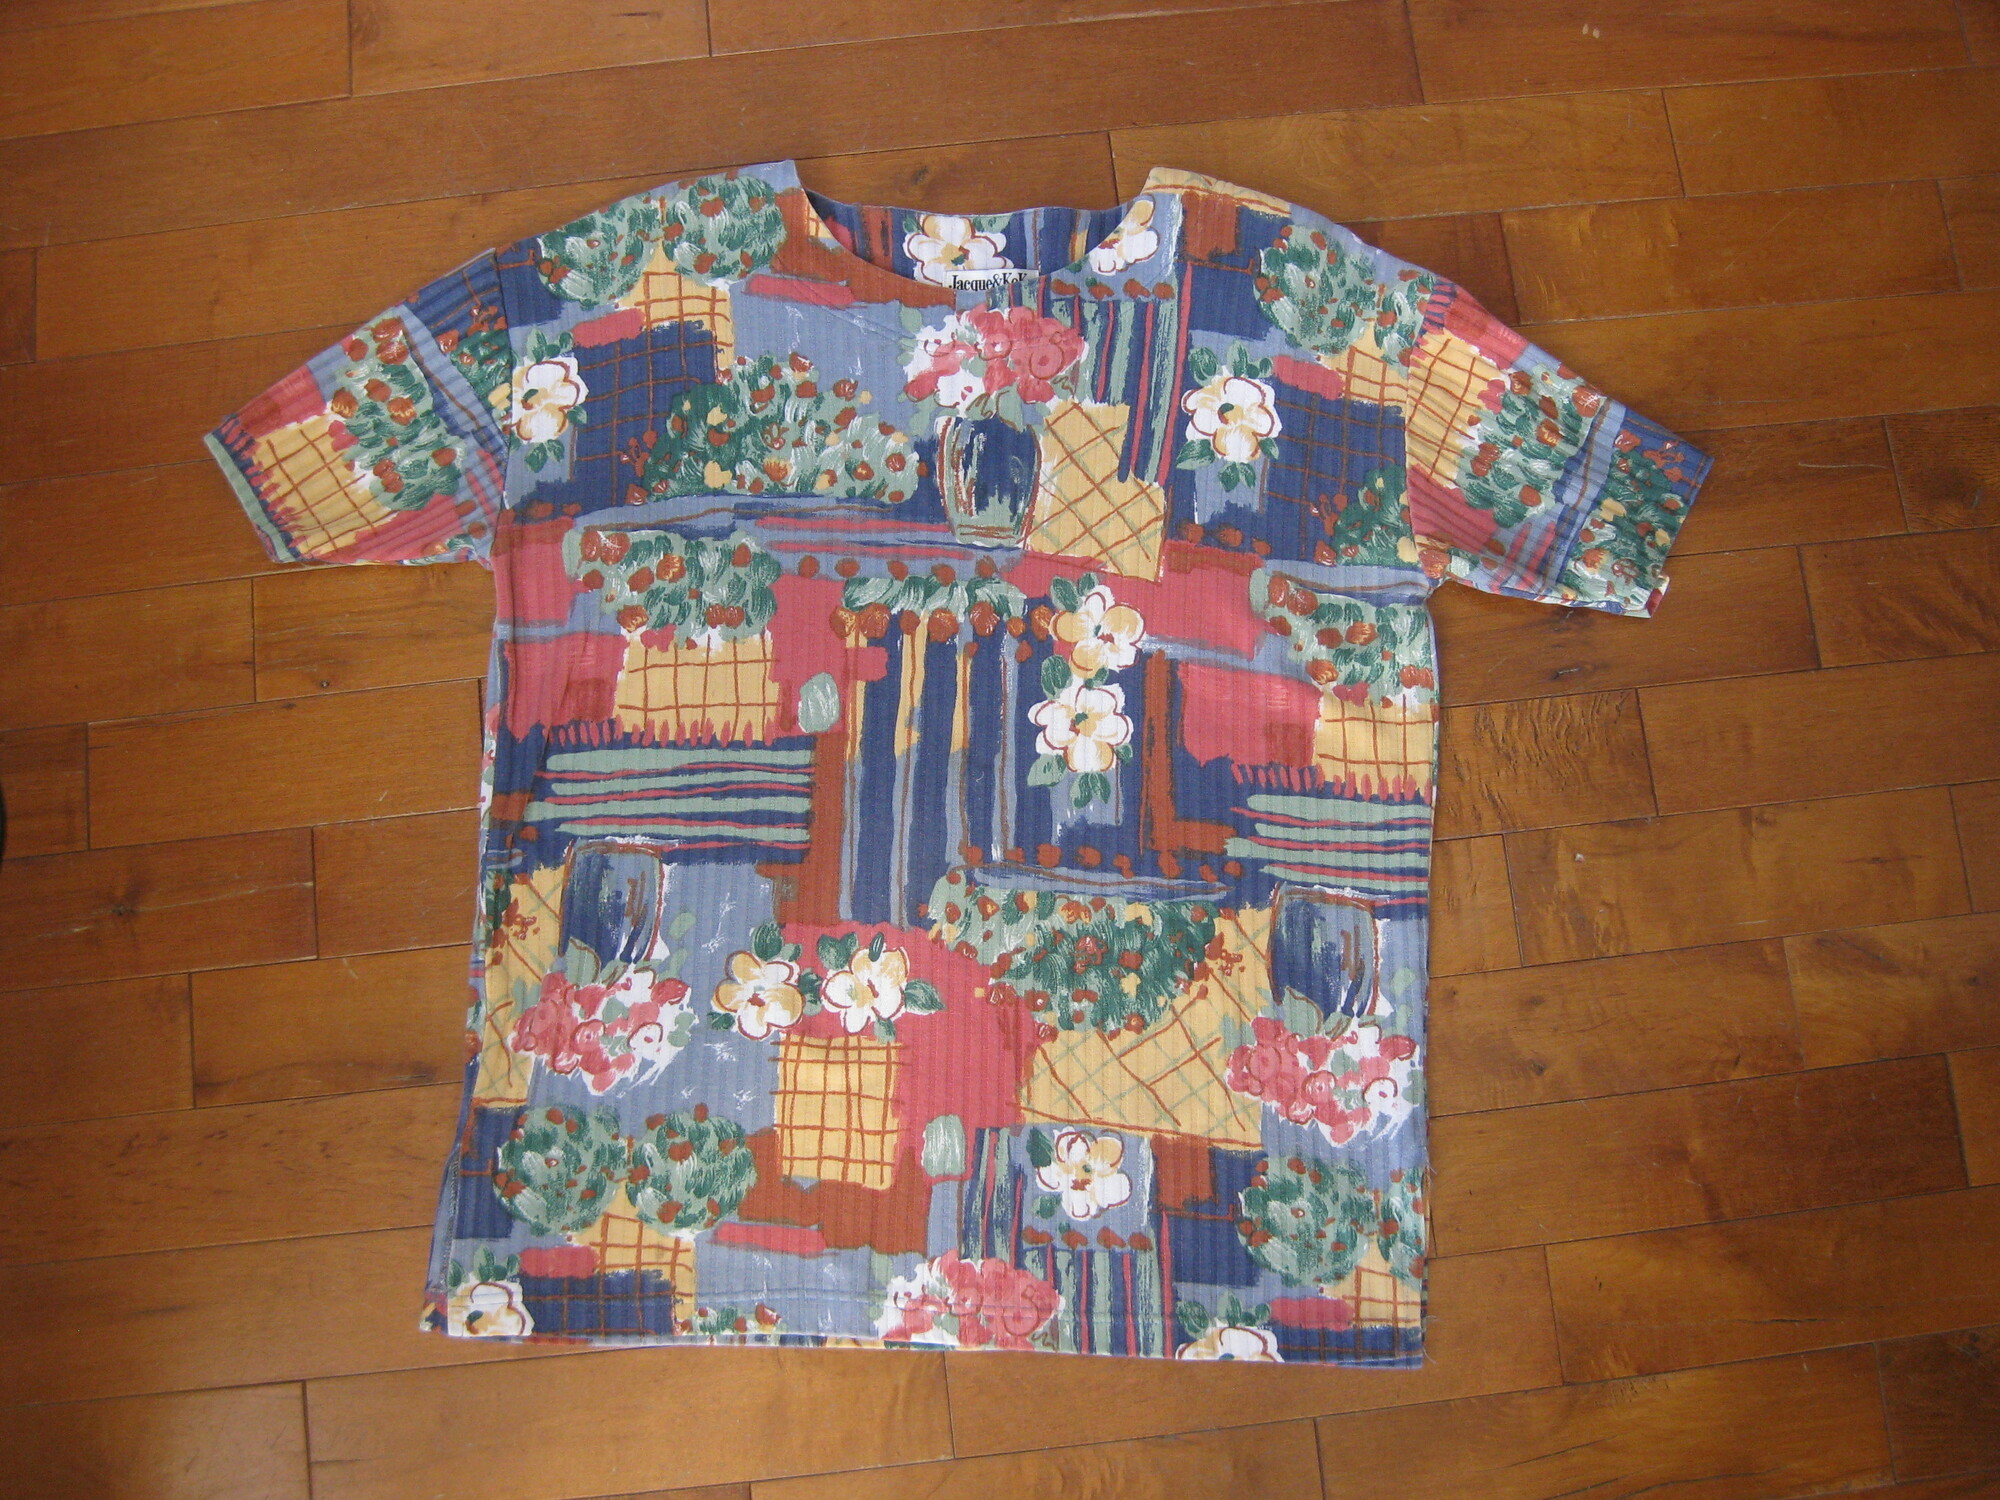 Pretty top in a painterly abstract gardeny print
Mainly blues and oranges
It's a bit long and has slits on the sides so it would look good worn untucked.
Short Sleeves
the fabric is ribbed, substantial  50/50 cotton poly blend.
Shoulder pads

It's by Jacque & Koko and was made in the USA

Flat Measurements please double where appropriate:
Shoulder to shoulder: 18 the shoulder seam is dropped, the 18 is the measurement from the outer edge of each shoulder pad, but the actually shoulder seam is a couple of inches below that.
Armpit to Armpit: 24
length: 27.75
width at hem: 24.5

Pefect condition!
Thanks for looking.
#41804